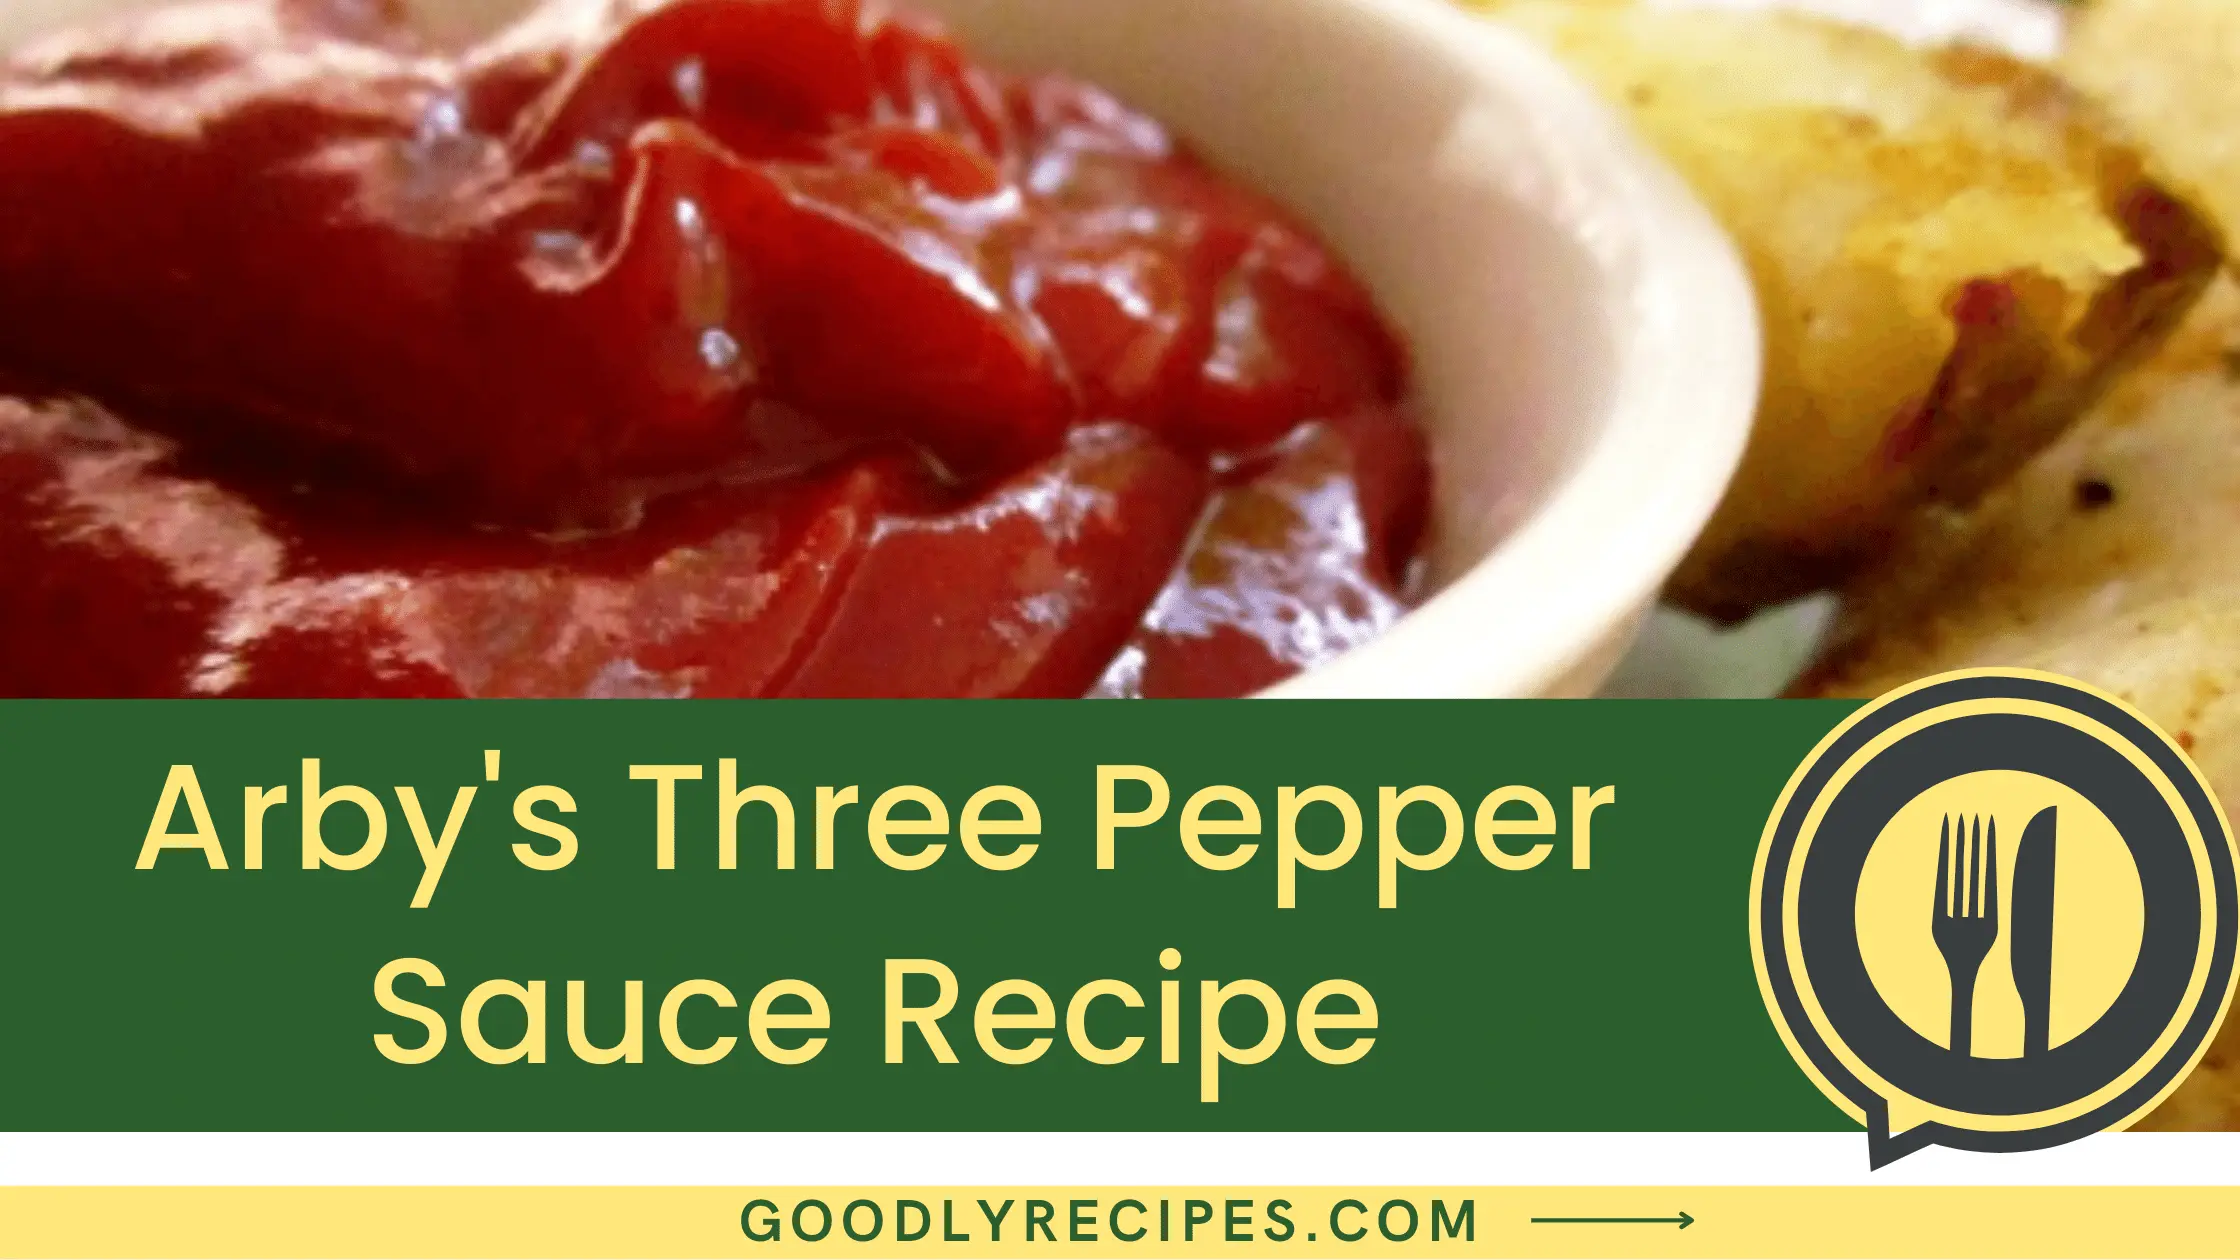 What is Arby’s Three Pepper Sauce Recipe?